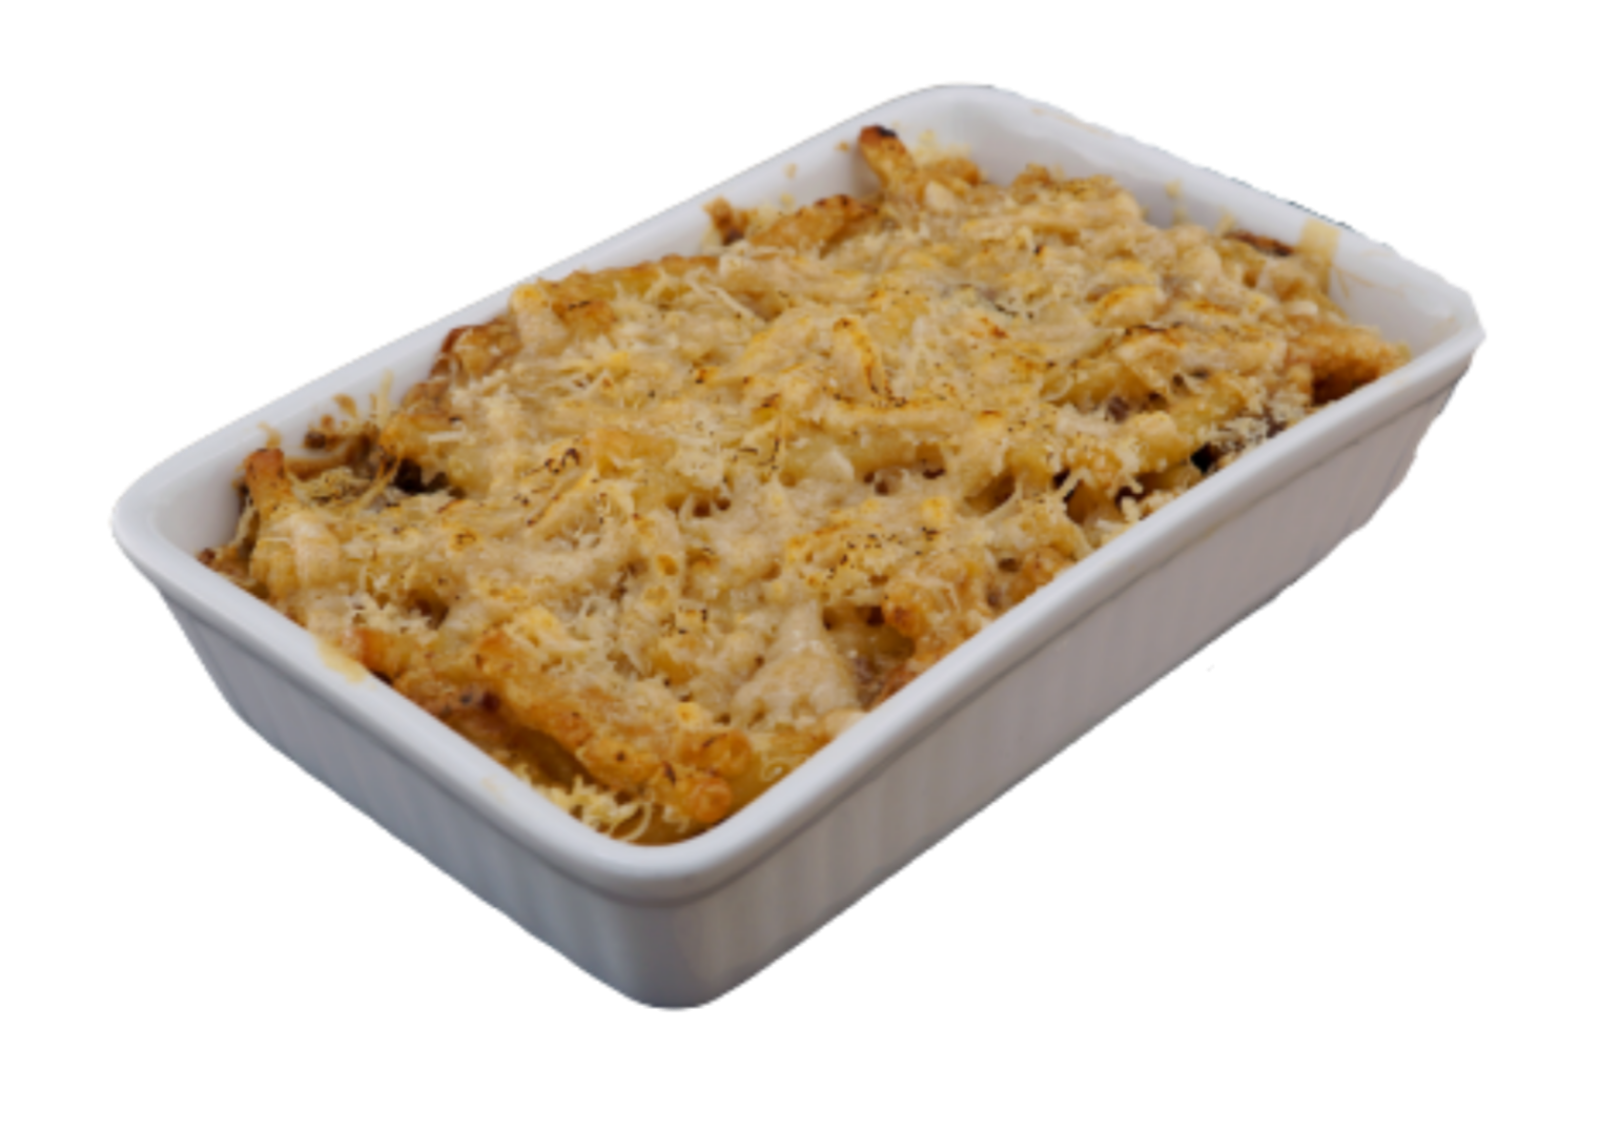 macaroni-gratin-forestiere-2-kl.png